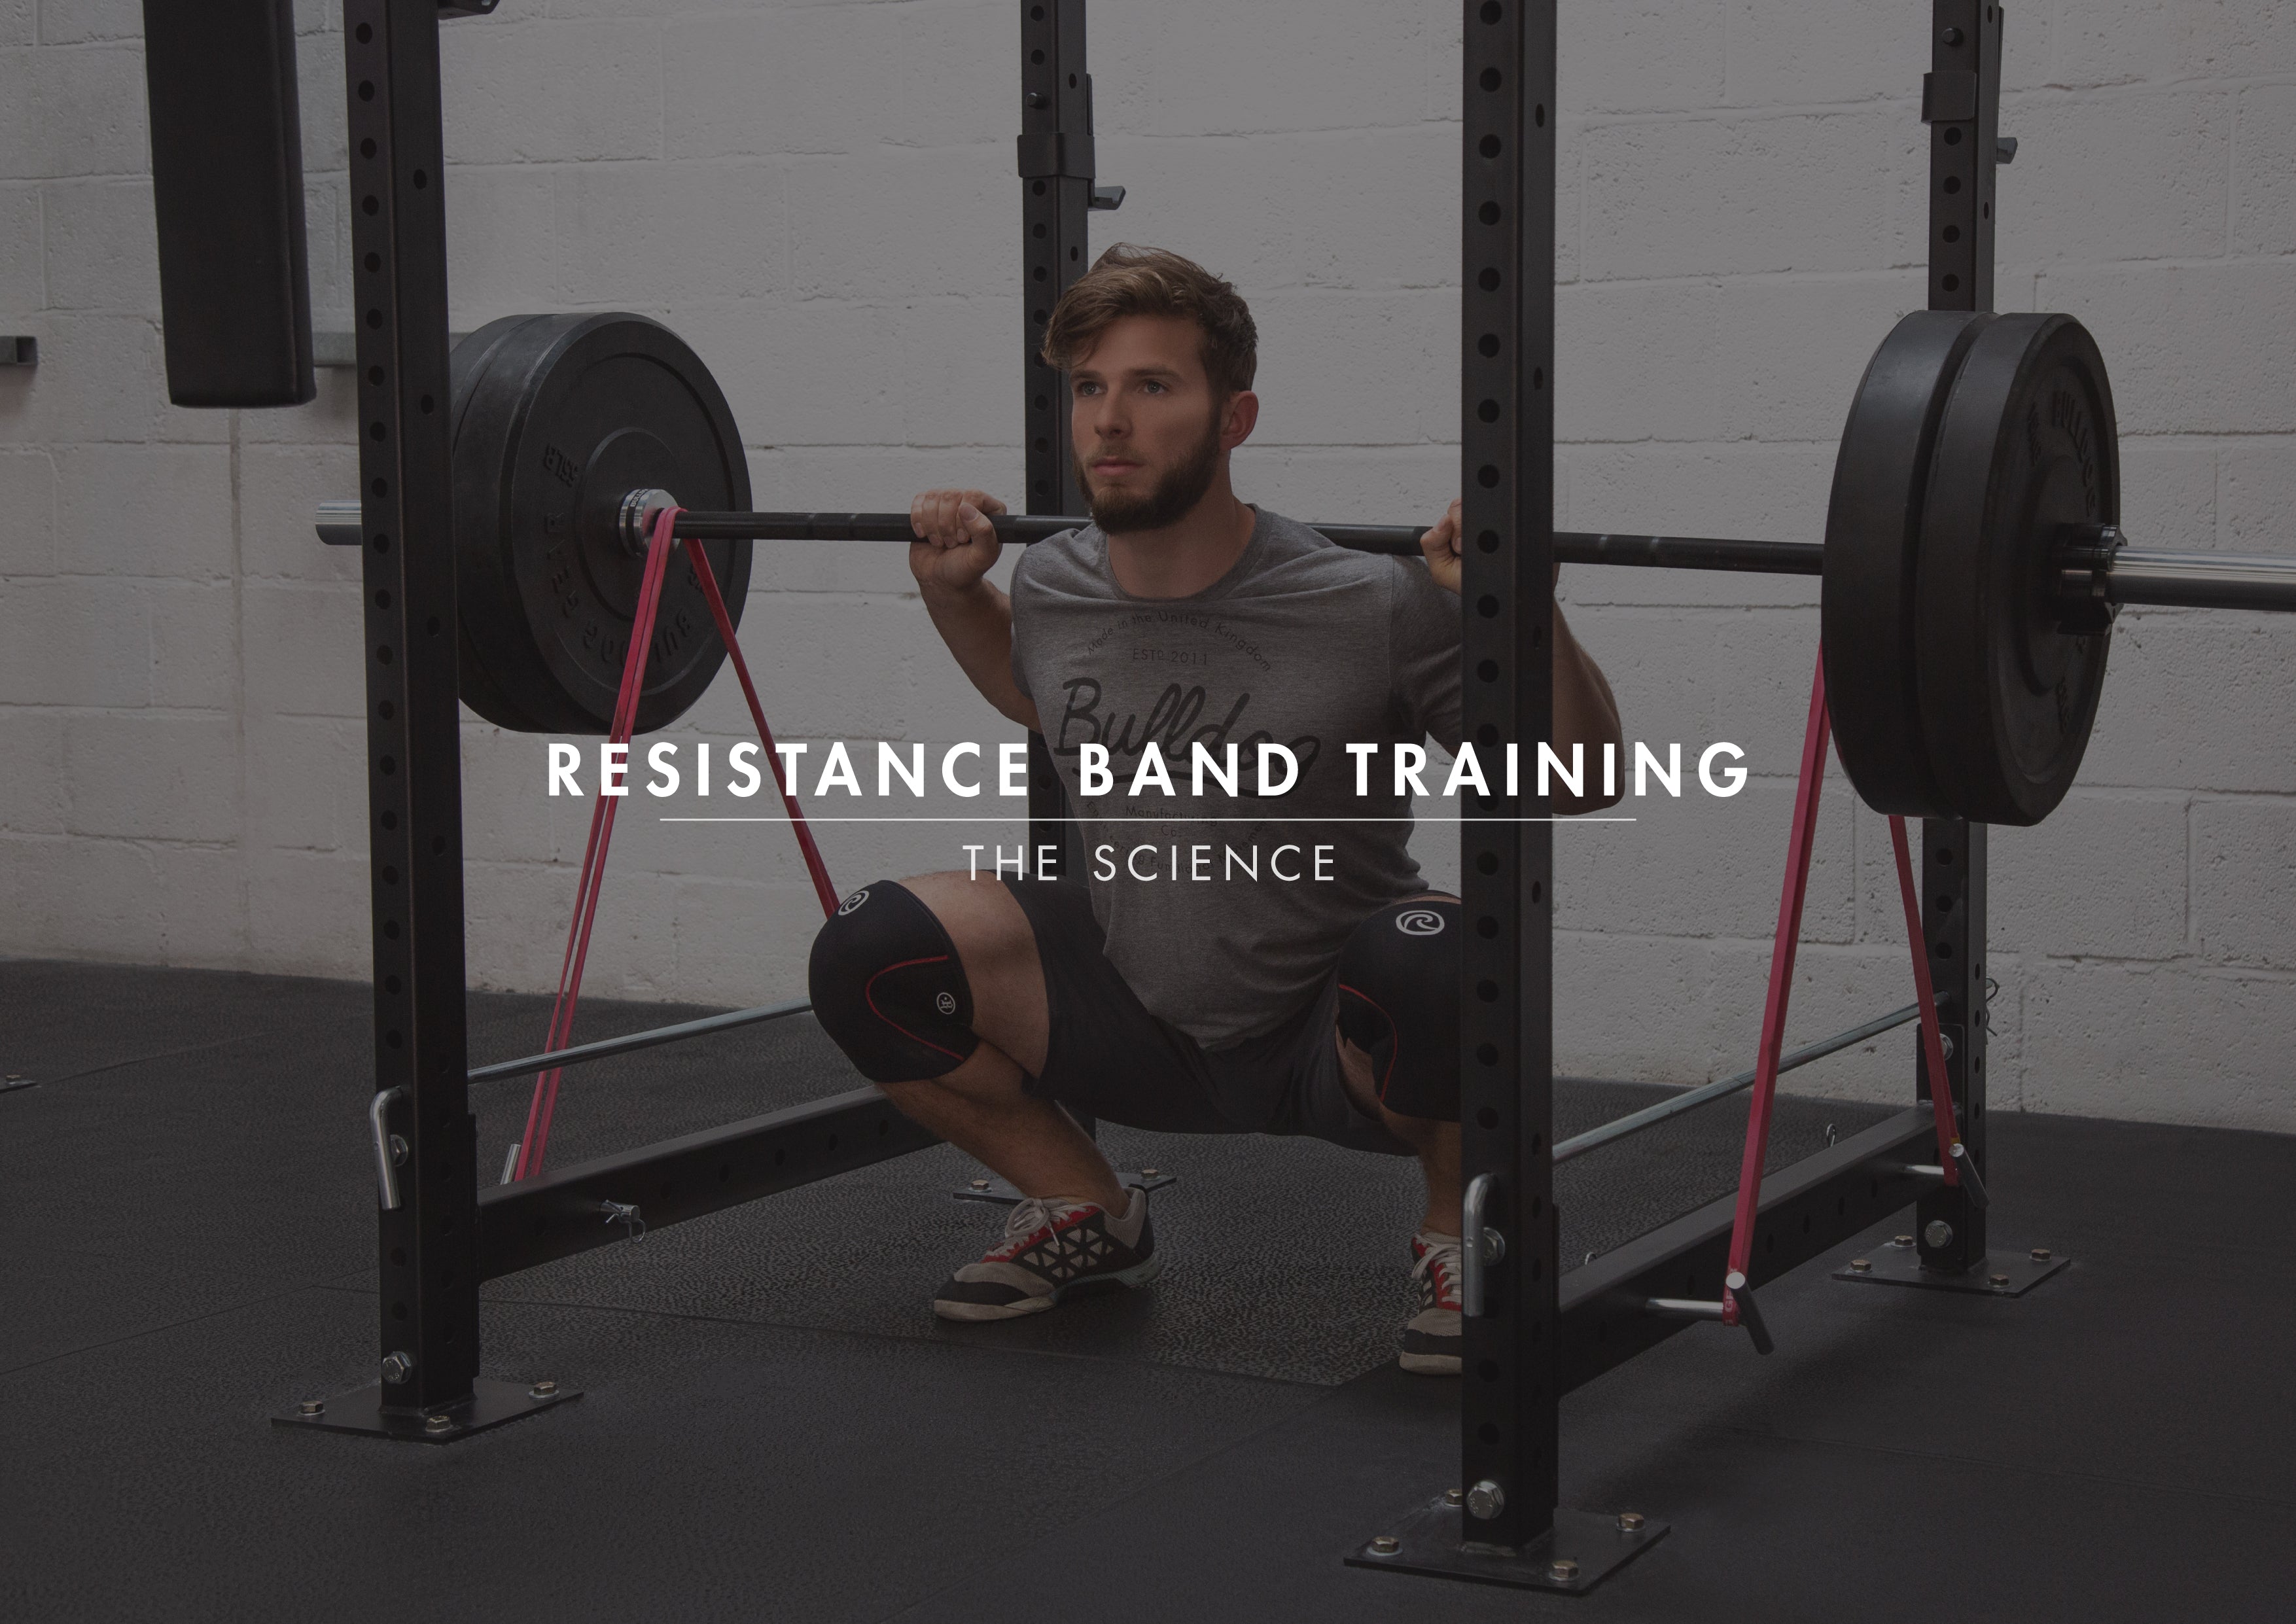 Resistance Bands, are they an effective training aid?